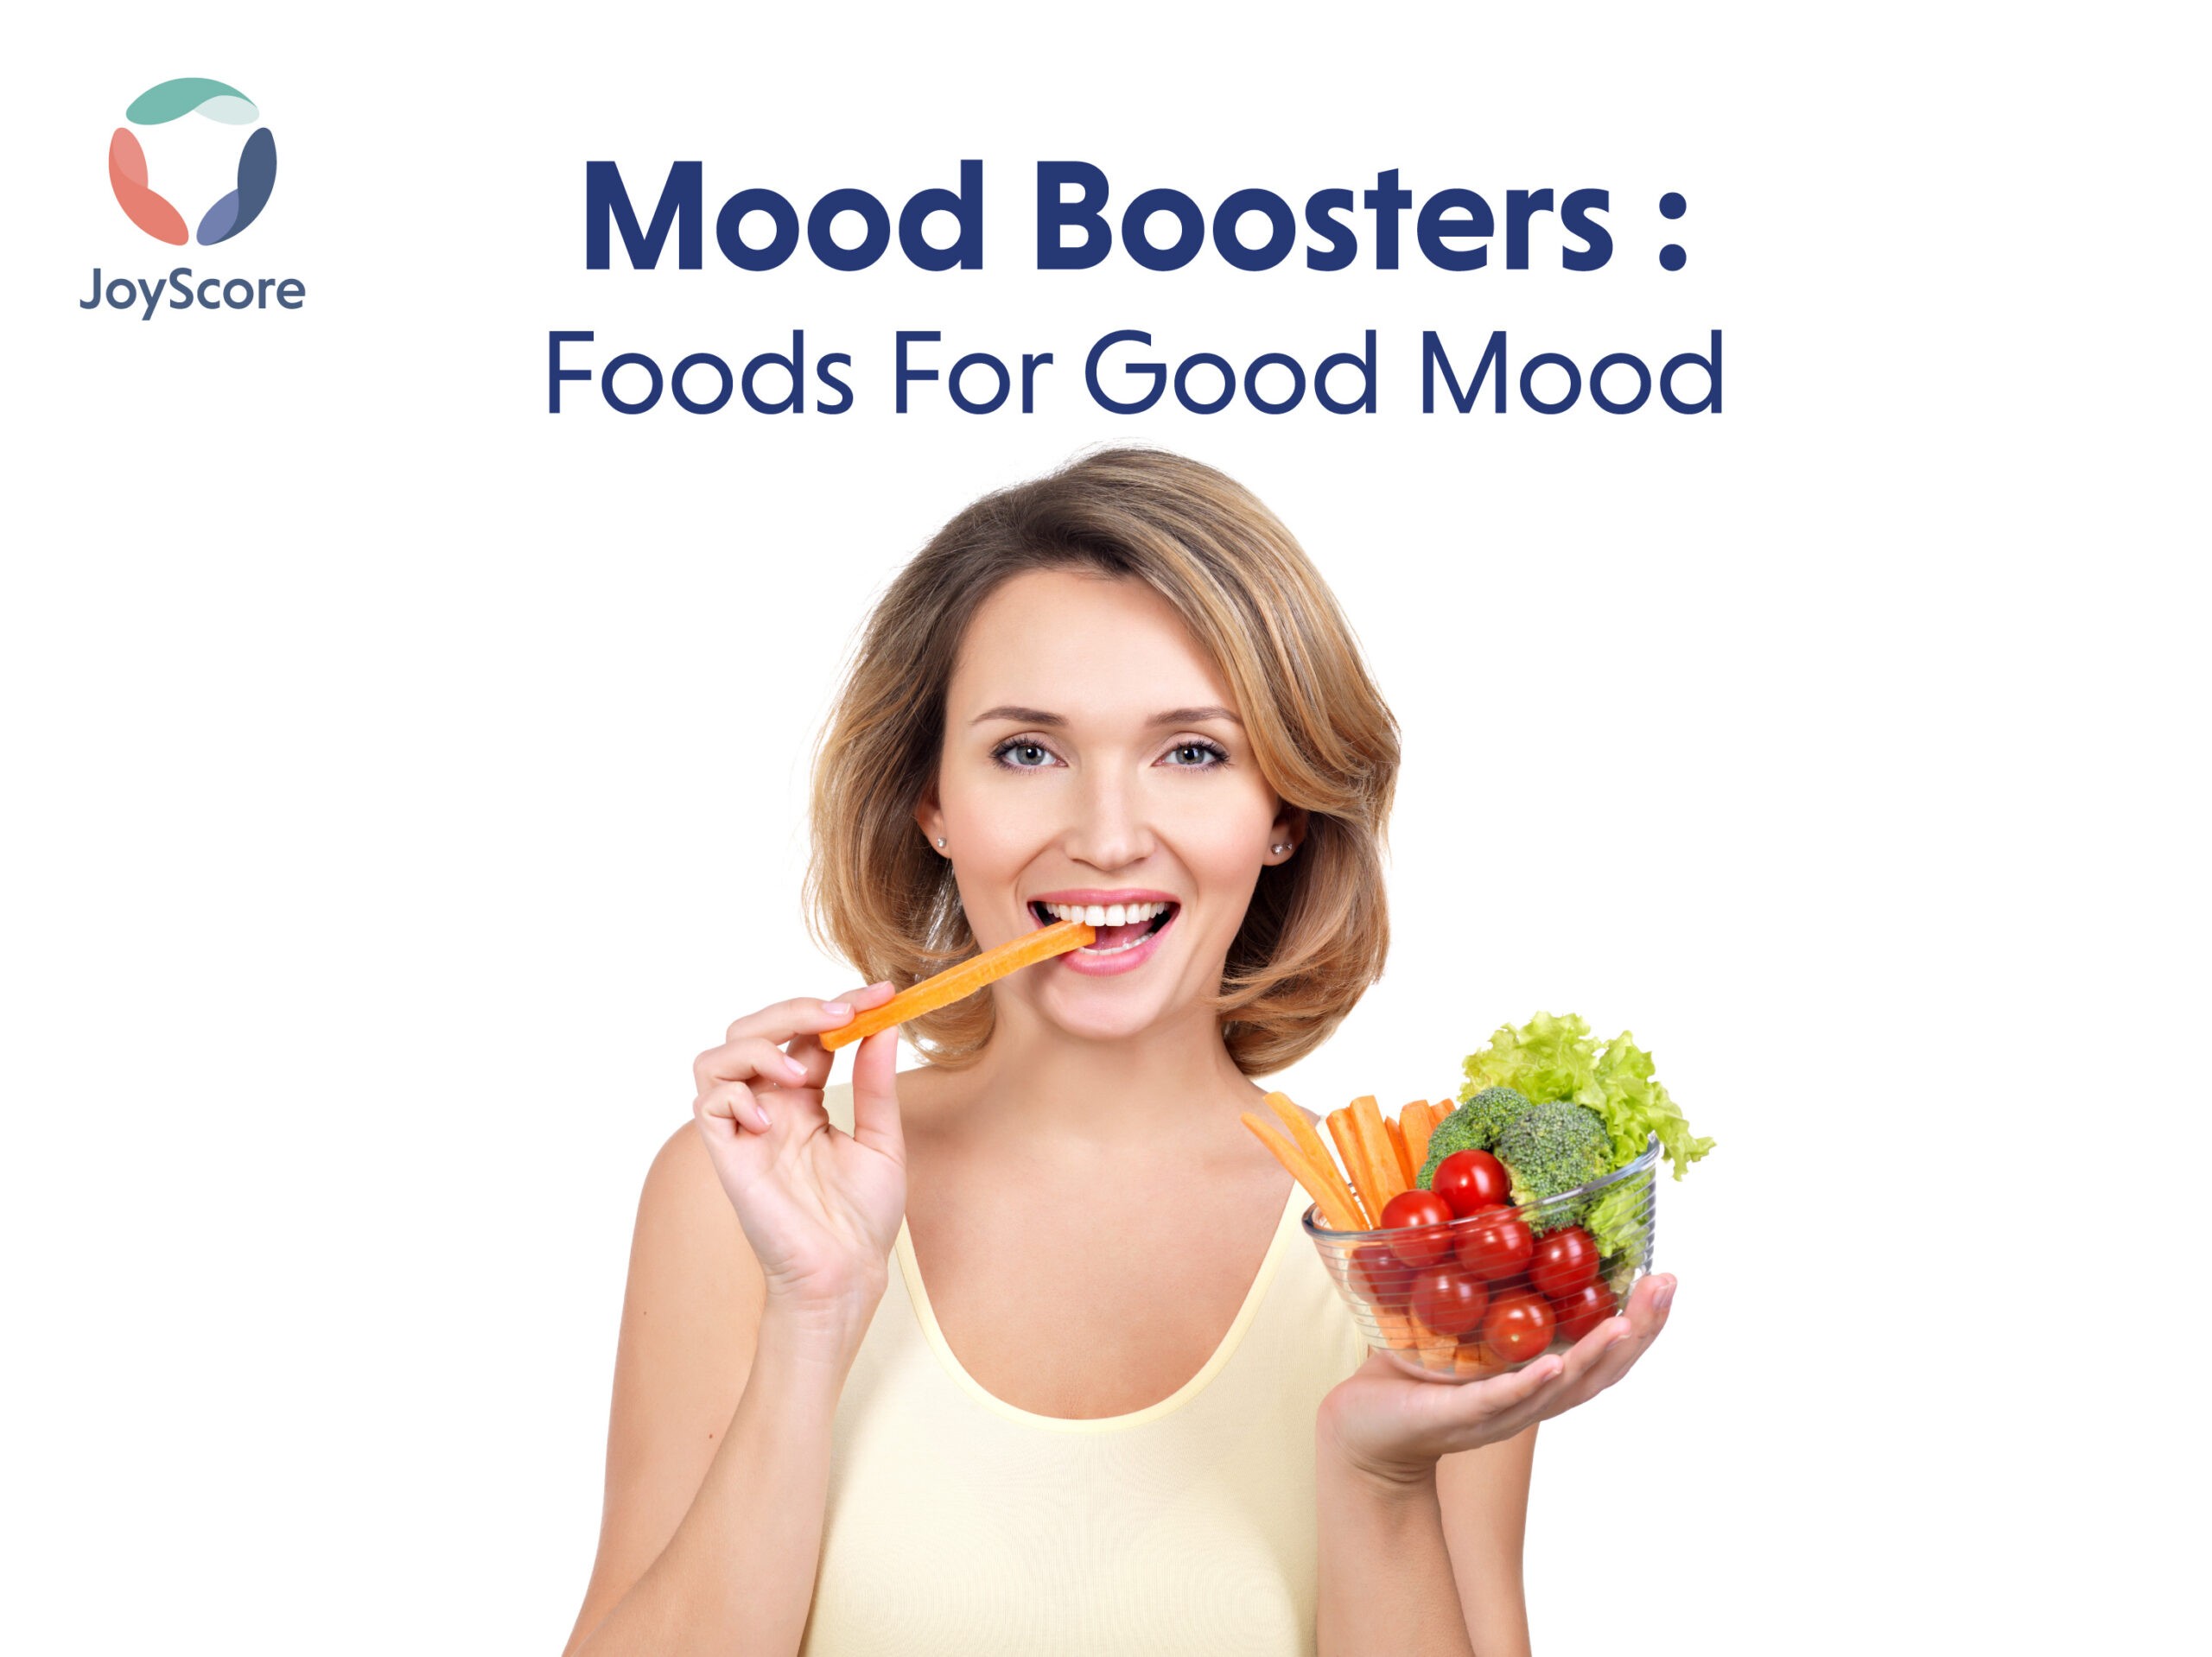 Foods for good mood